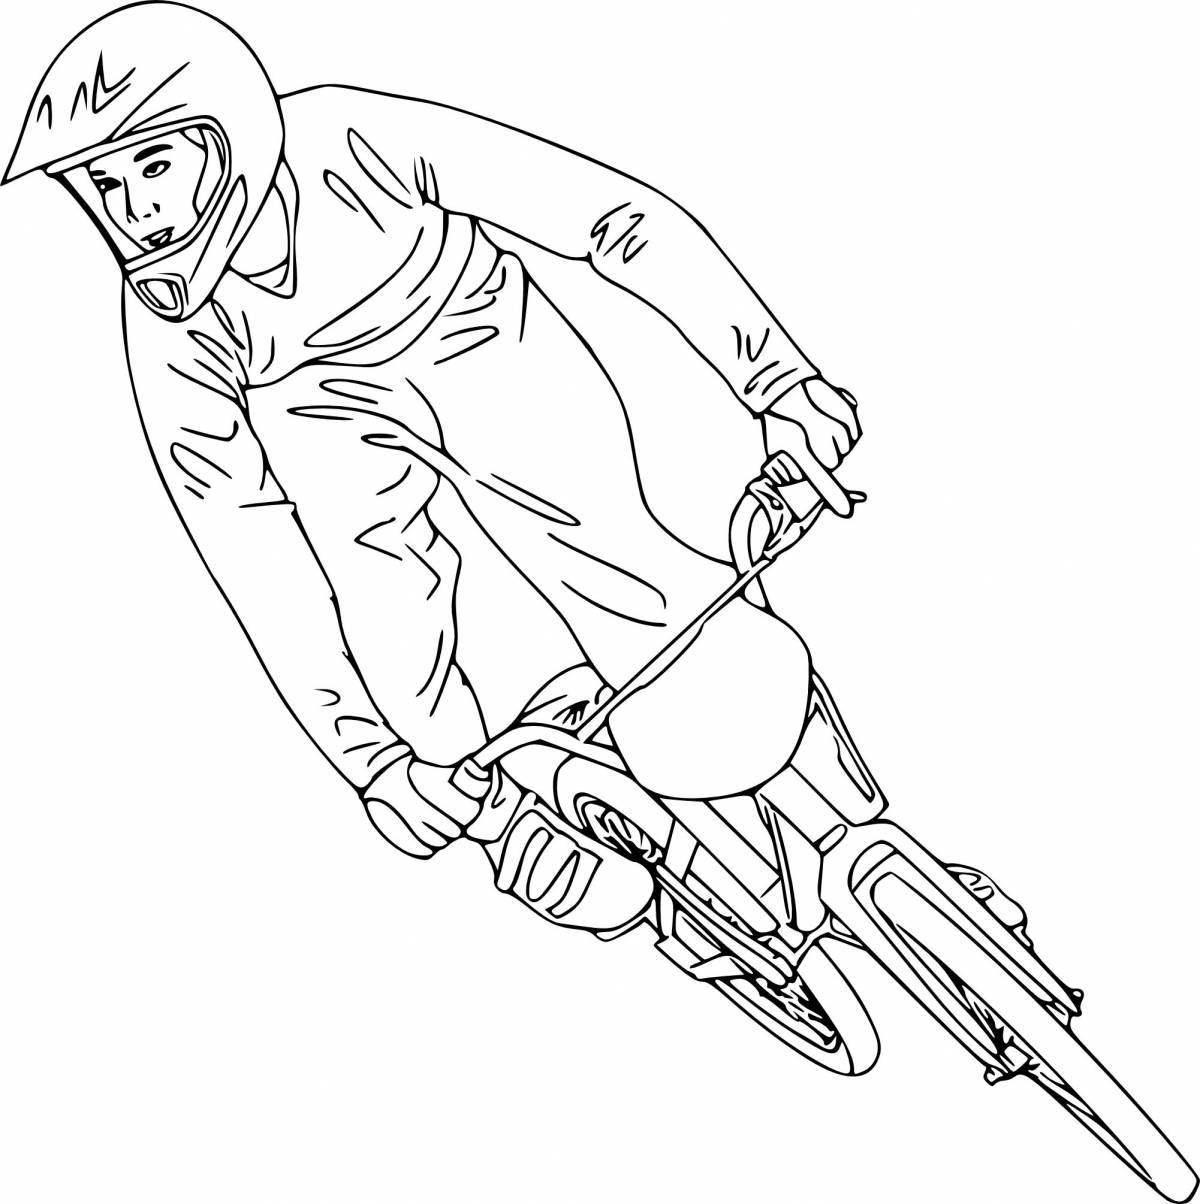 Coloring page energetic stunt scooter